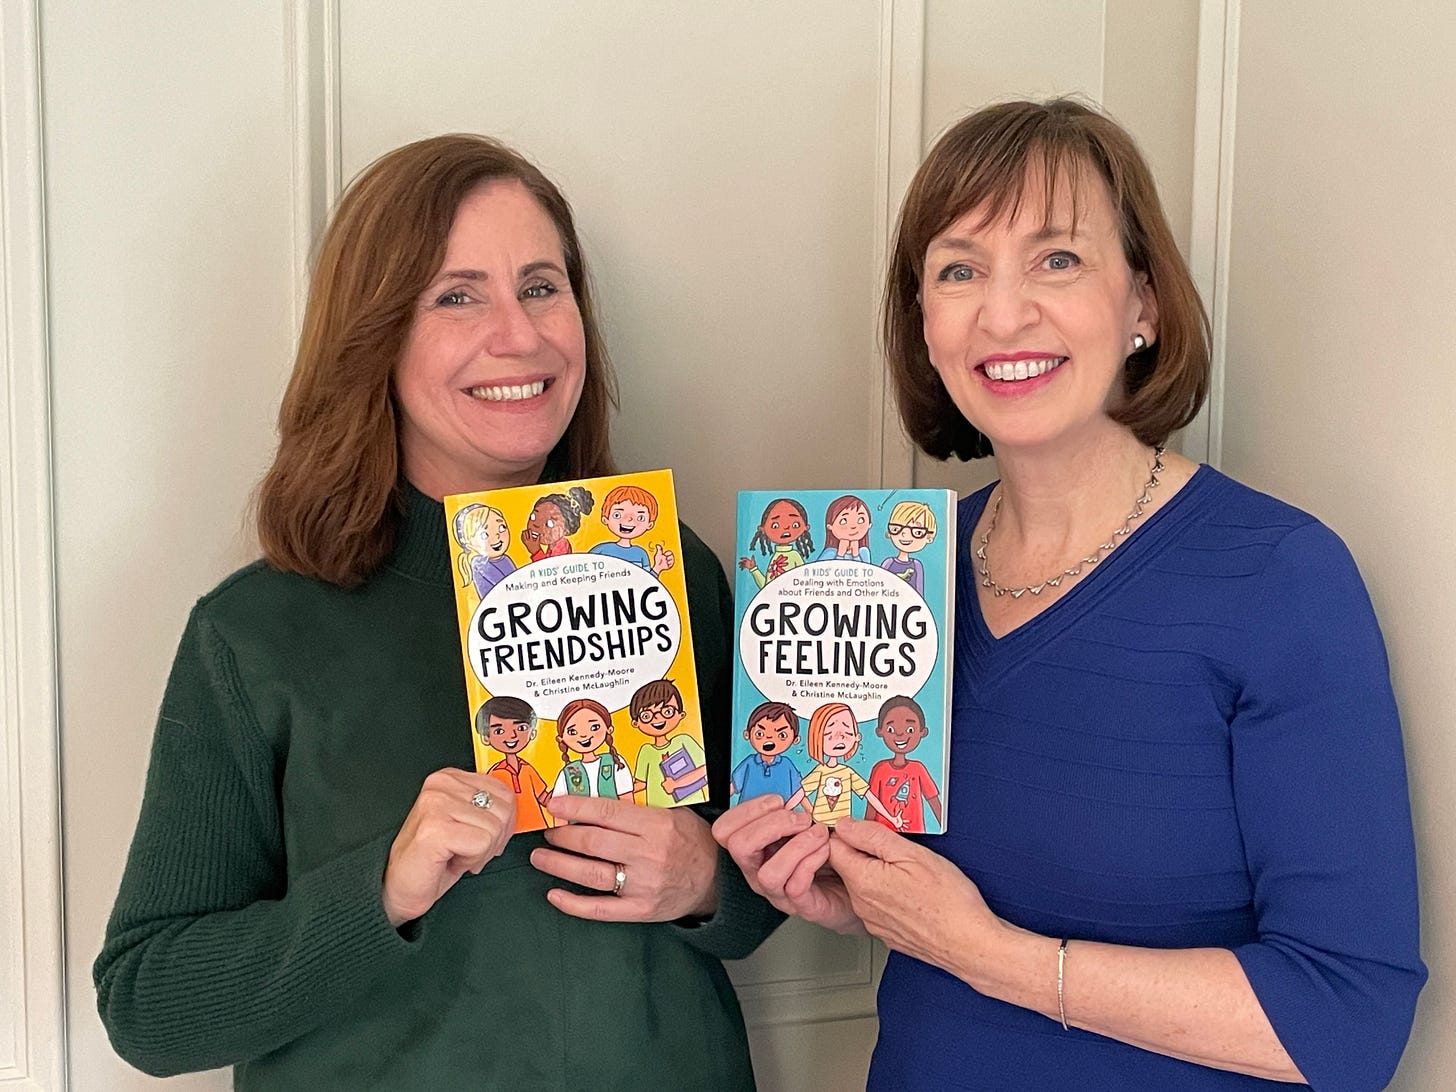 Christine McLaughlin and Eileen Kennedy-Moore, PhD, with their books Growing Friendships and Growing Feelings (for ages 6-12)